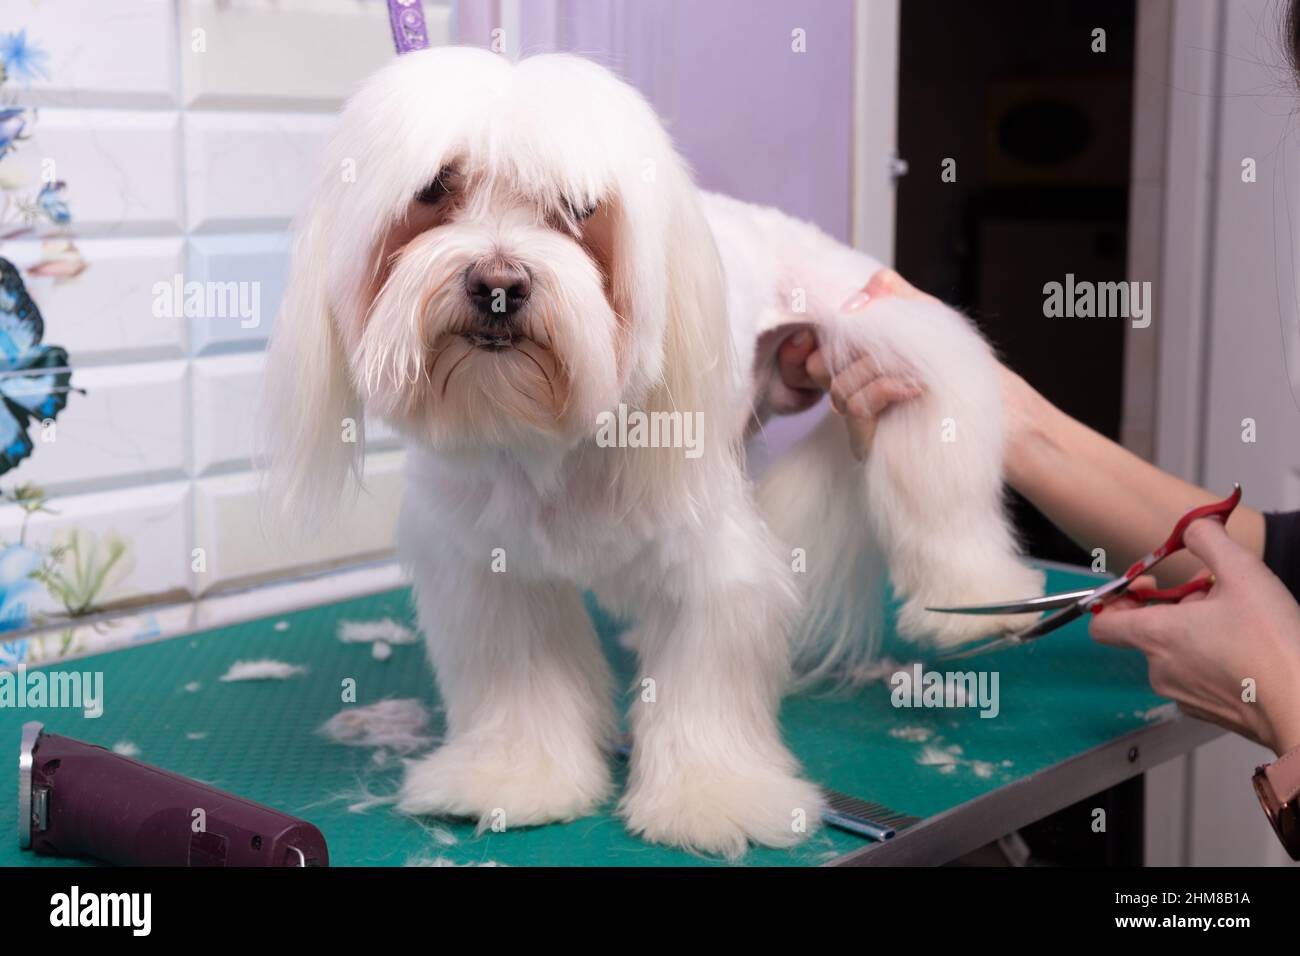 Professional groomer takes care of Maltese lapdog in animal beauty salon. Grooming salon worker cuts hair on white decorative toy dog paw in close up. Stock Photo